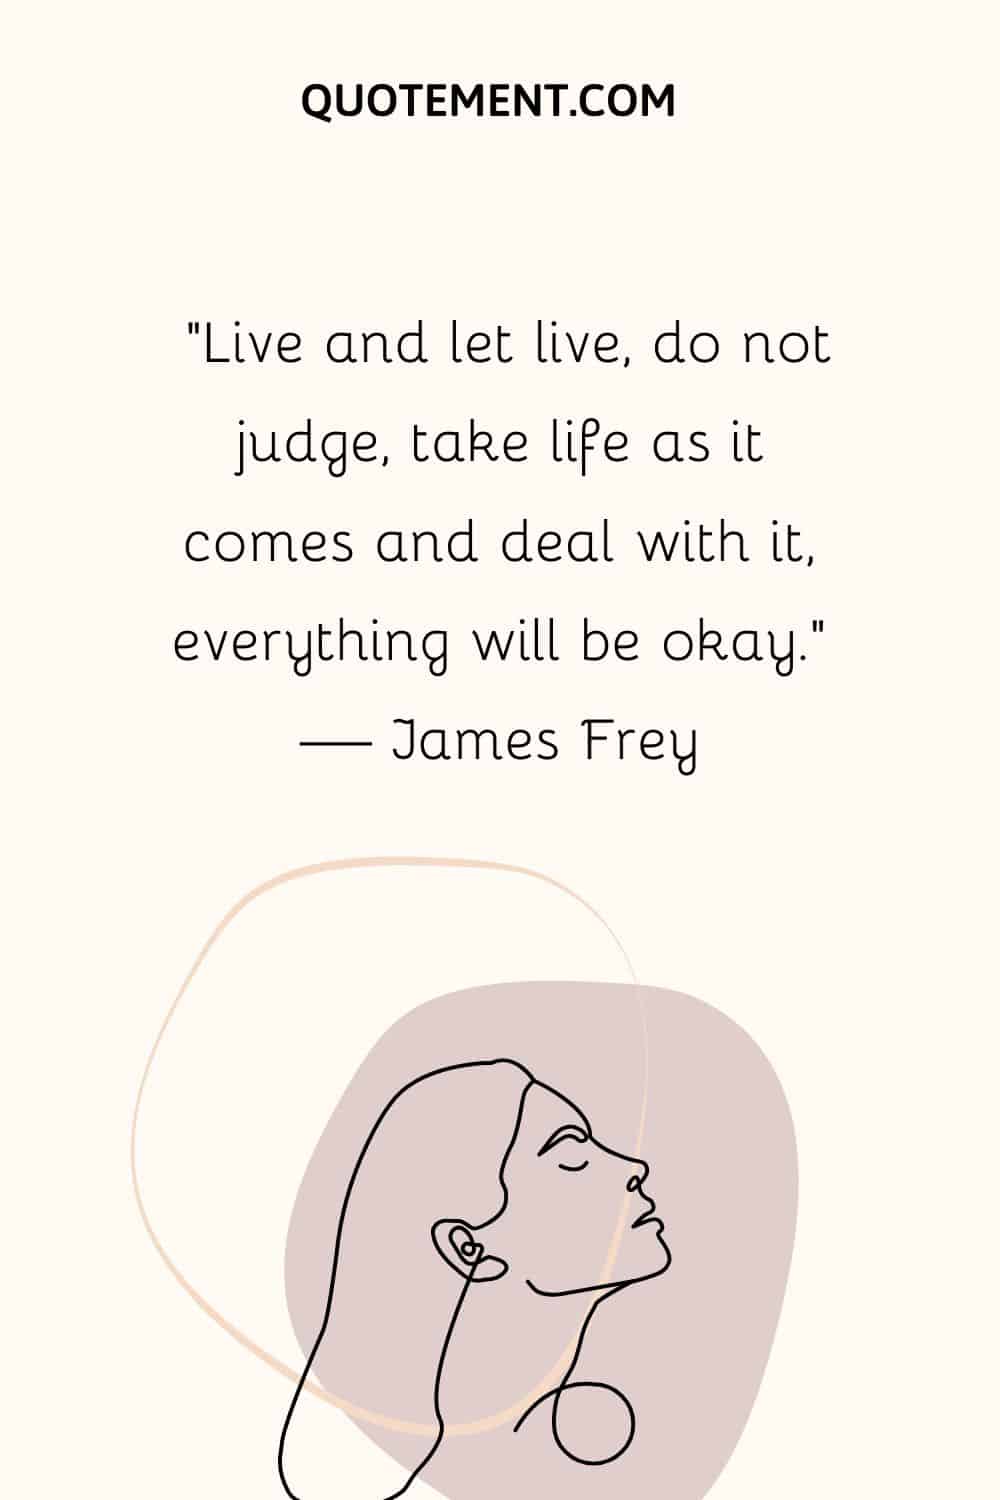 “Live and let live, do not judge, take life as it comes and deal with it, everything will be okay.” — James Frey